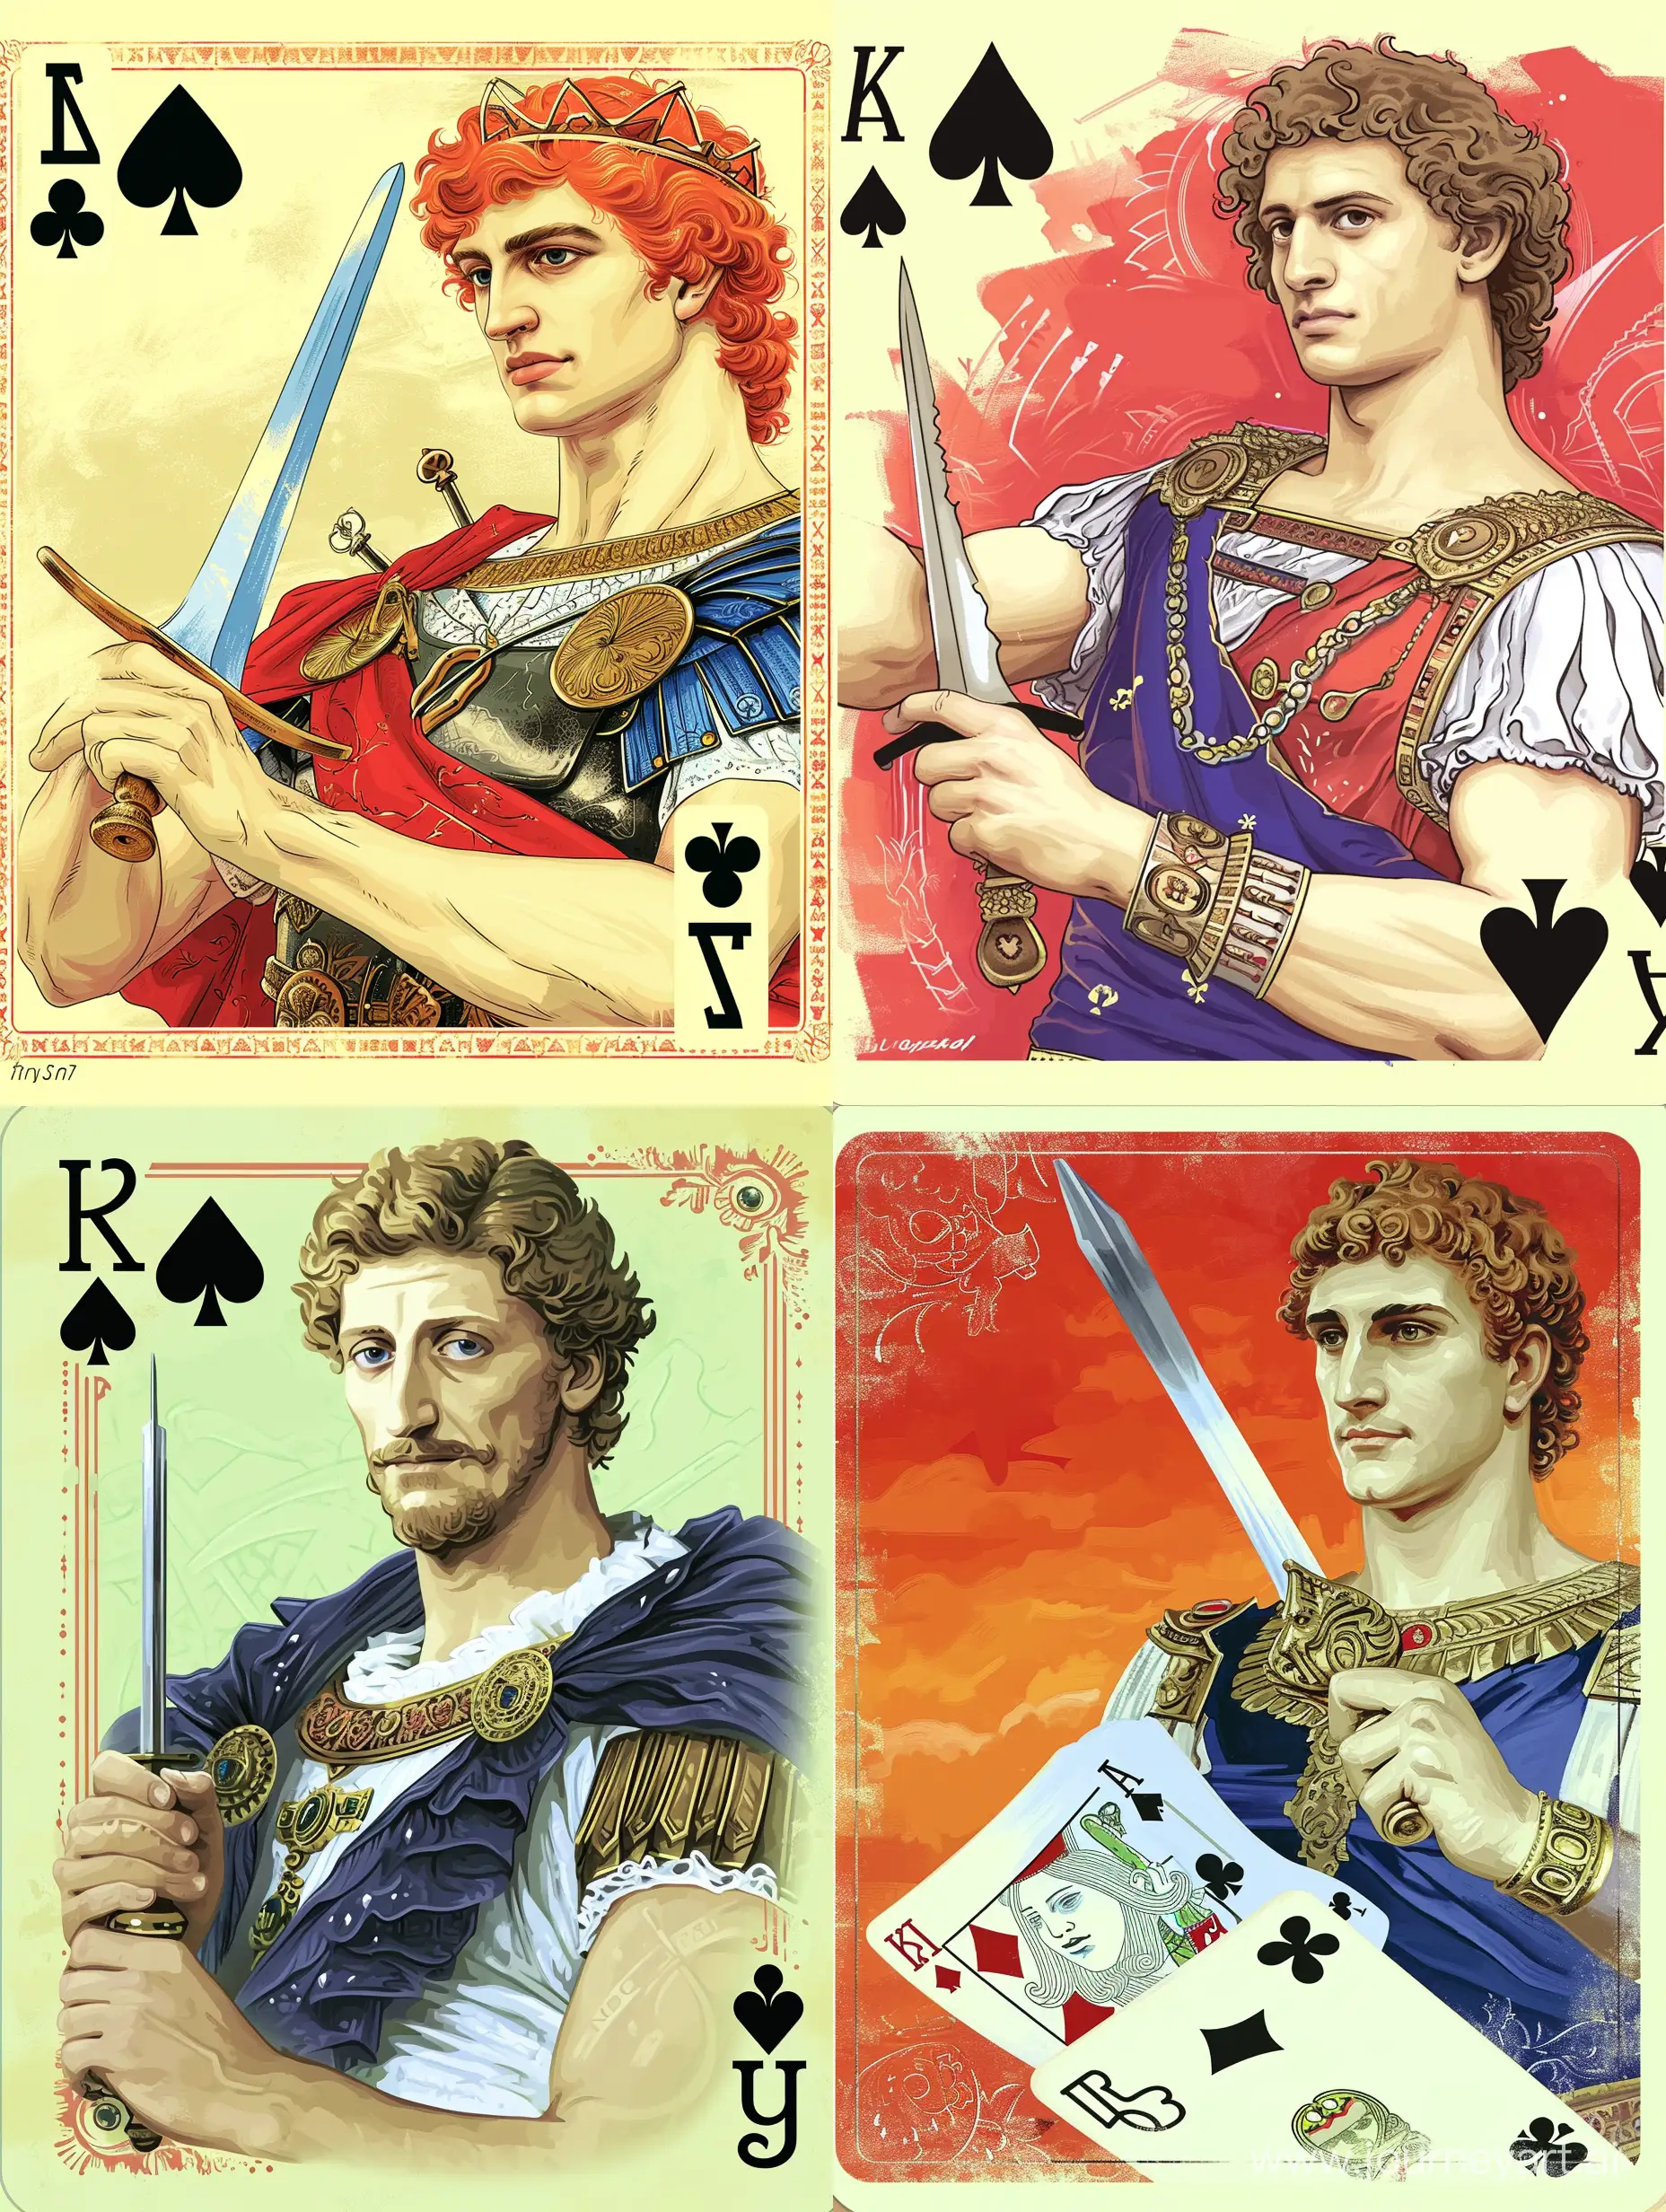 King-of-Clubs-Playing-Card-Design-Inspired-by-Alexander-the-Great